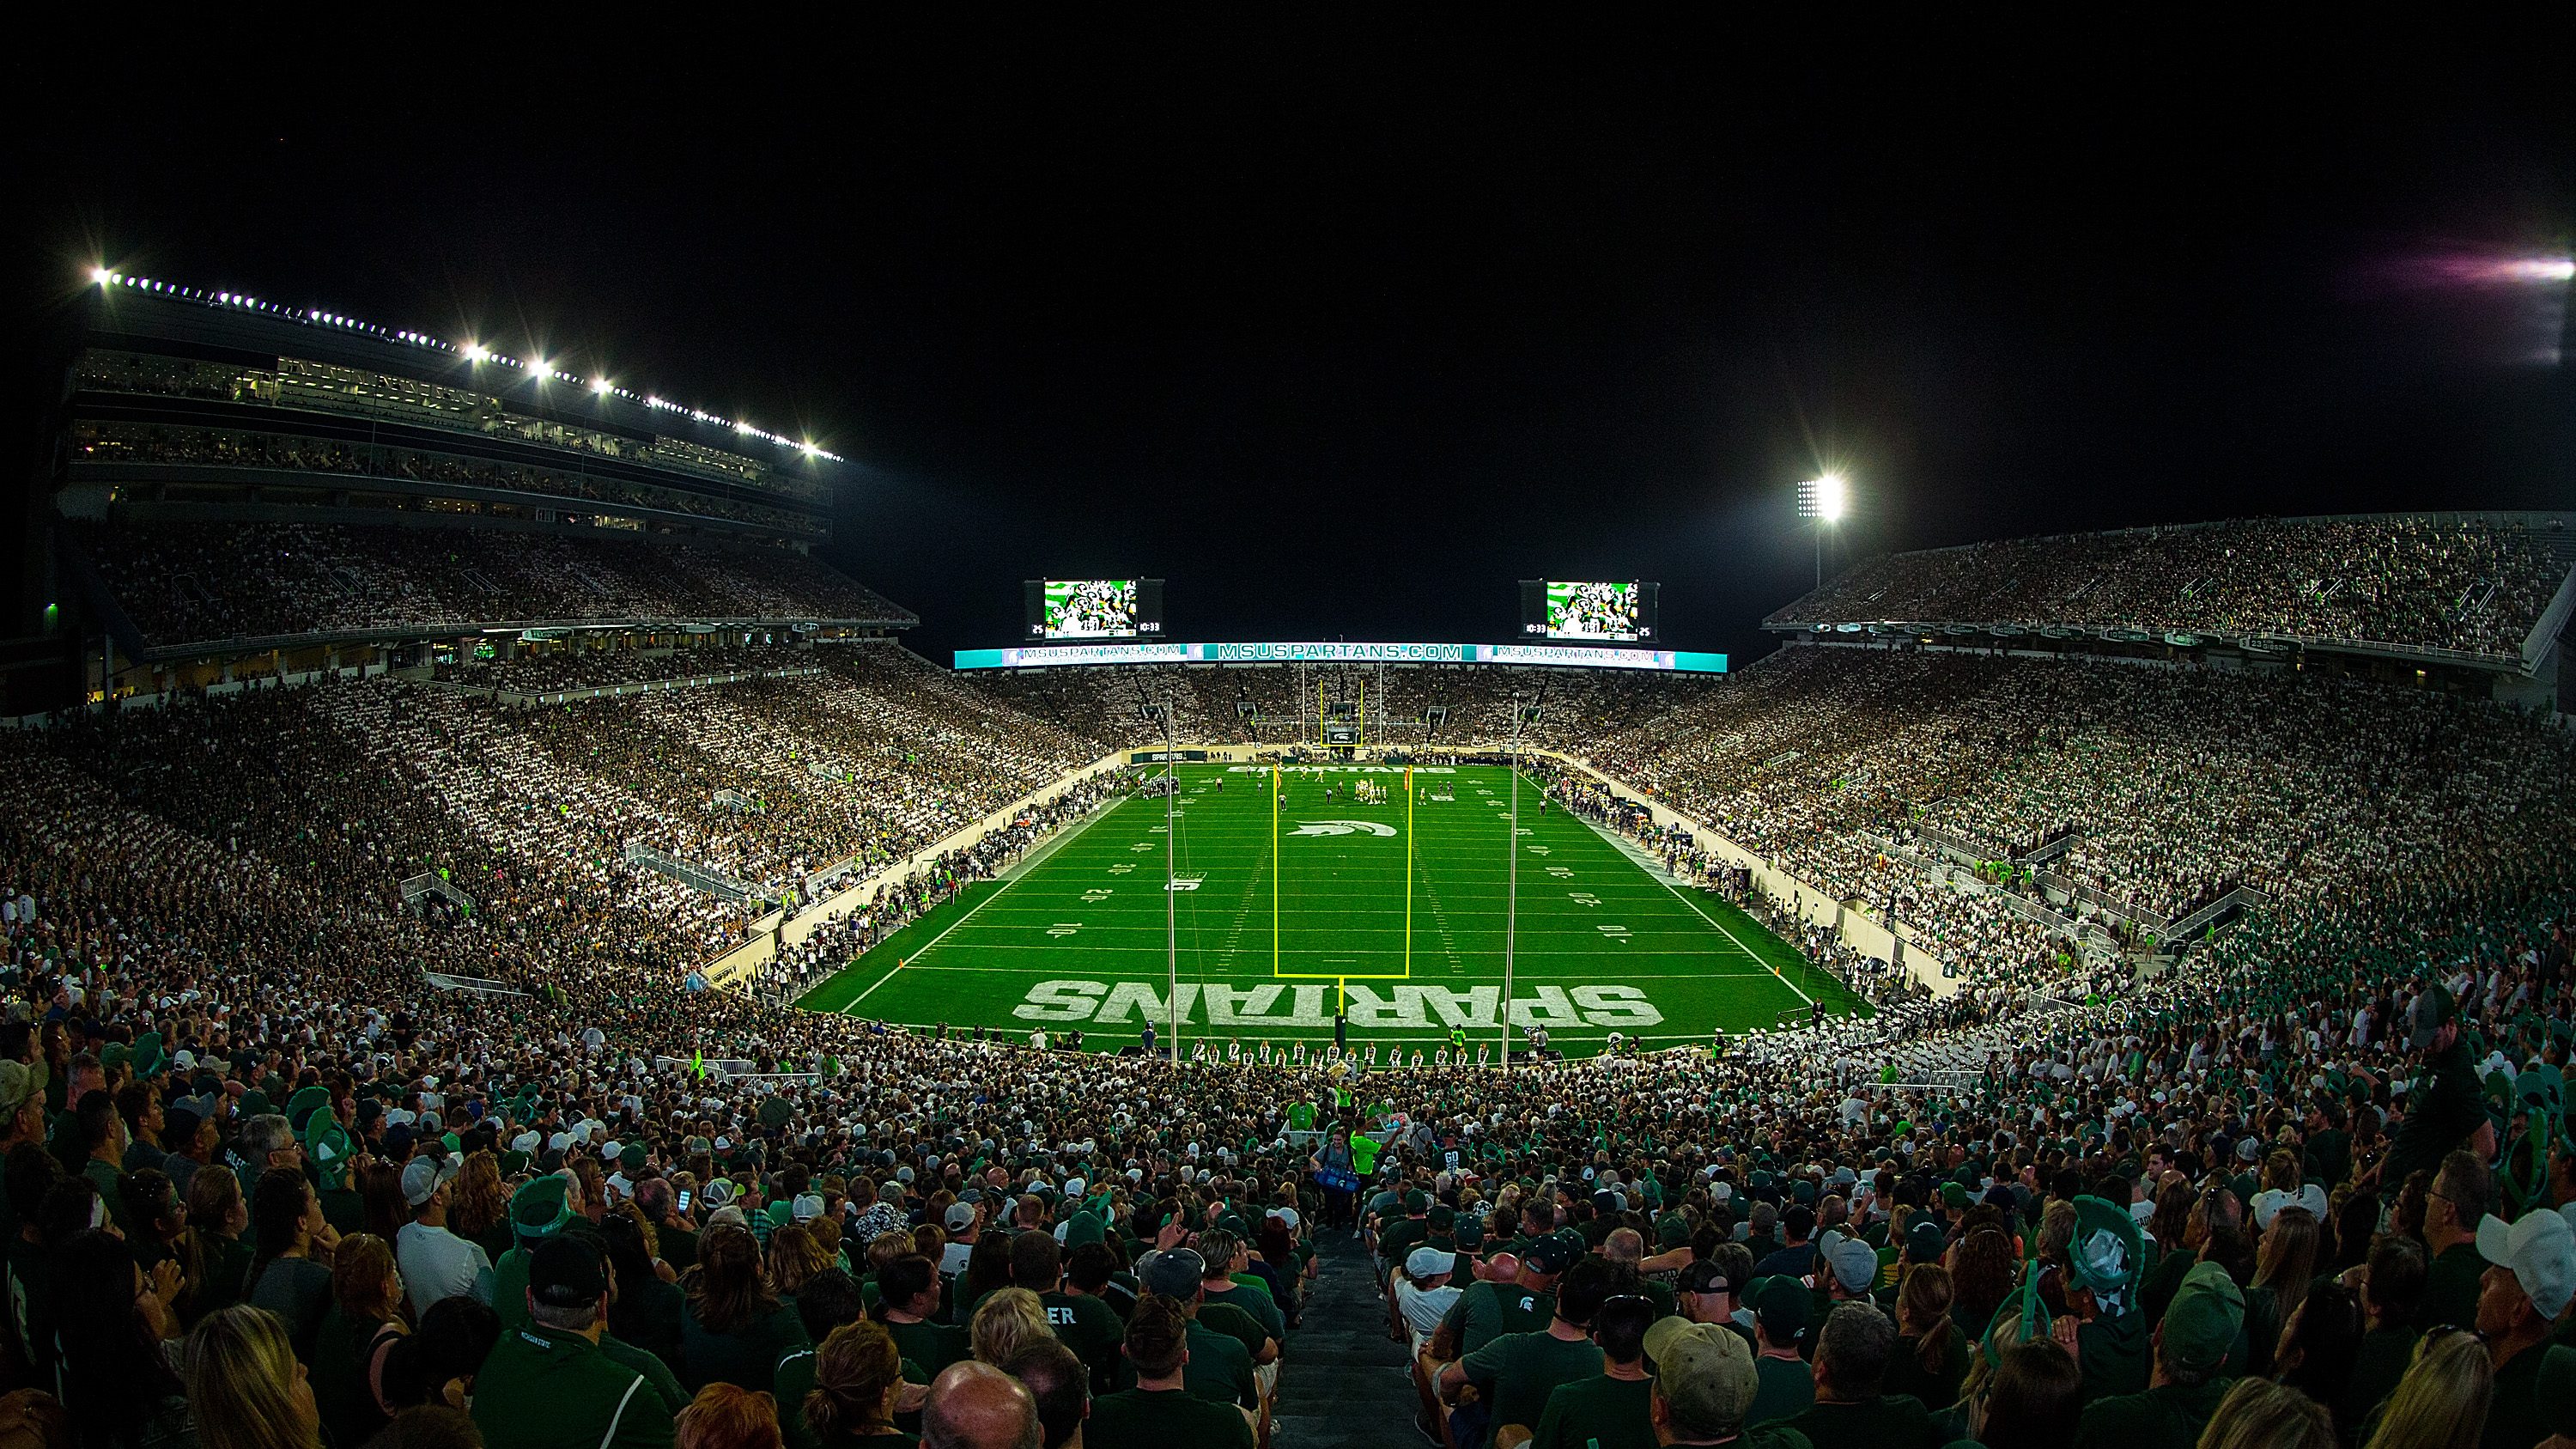 A general view of Spartan Stadium during the game between Notre Dame and Michigan State Spartans on September 23, 2017 in East Lansing, Michigan. The stadium is packed.